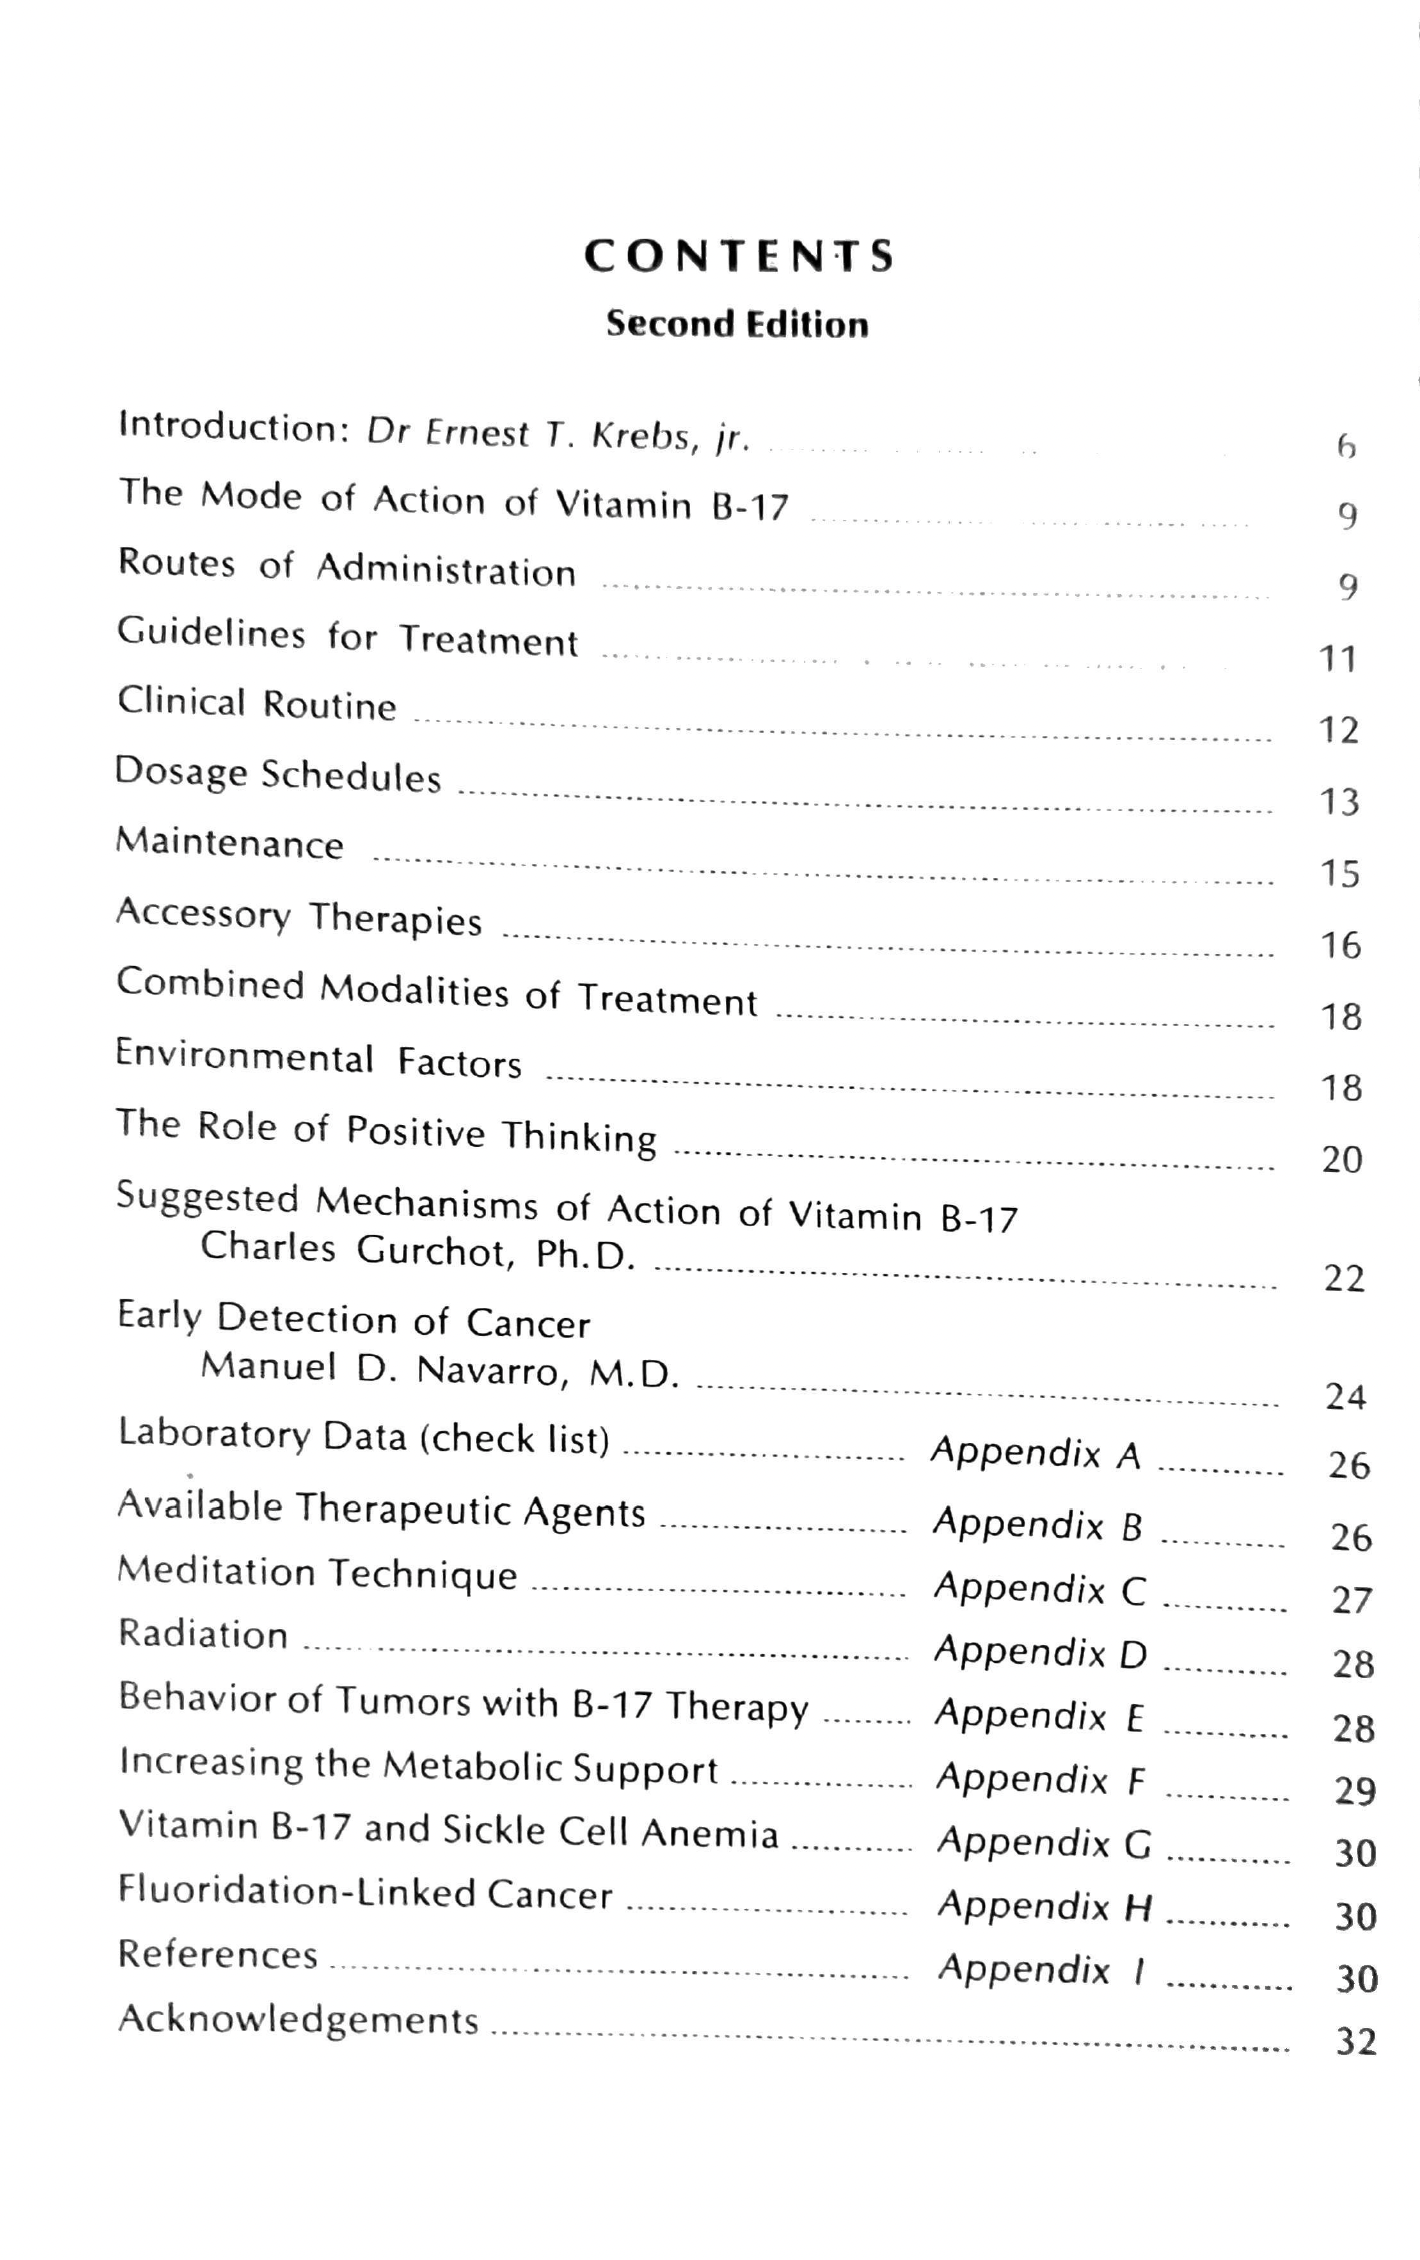 (Book) Physician's Handbook of Vitamin B-17 Therapy (32 pages)